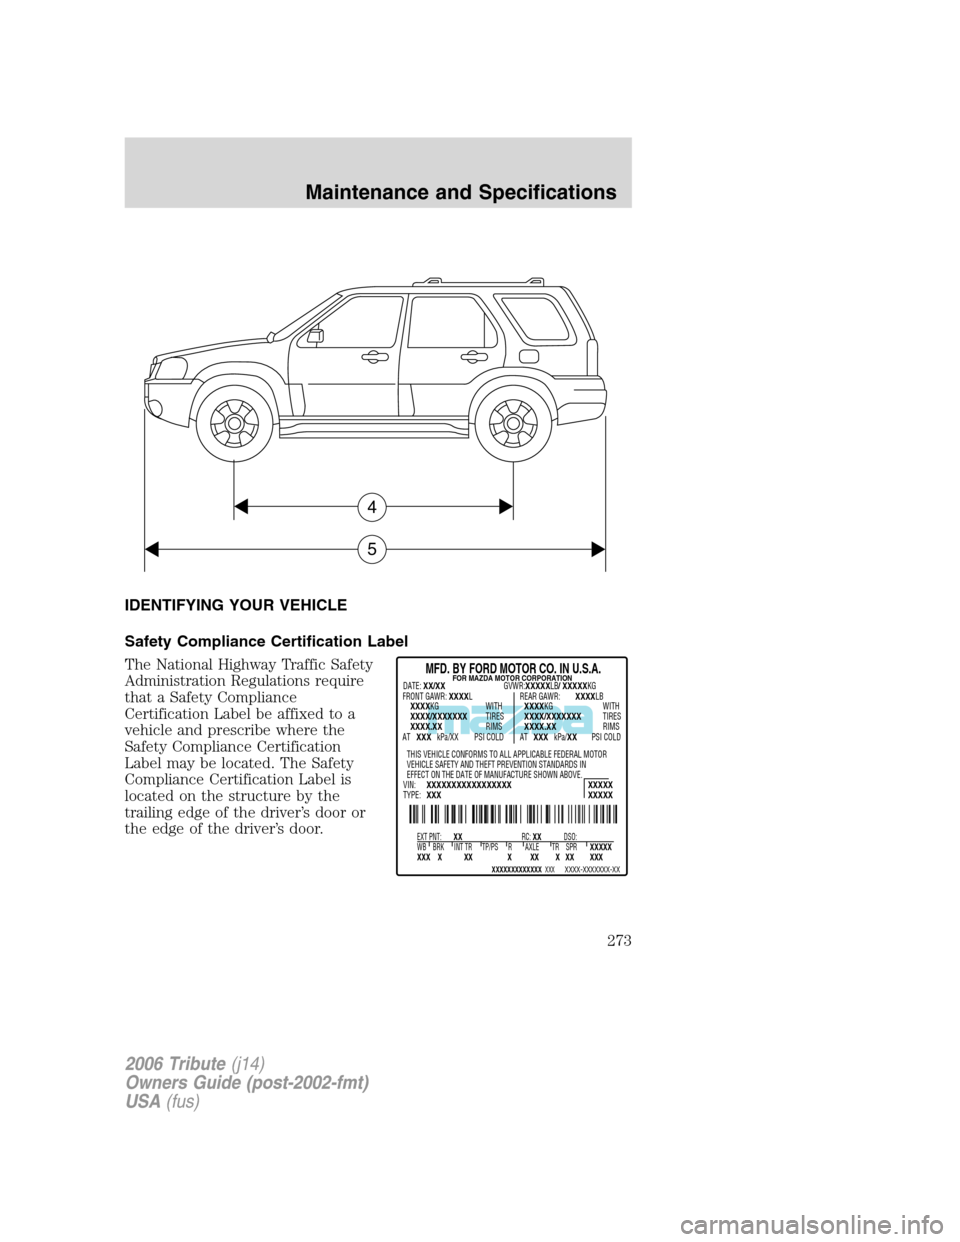 MAZDA MODEL TRIBUTE 2006  Owners Manual (in English) IDENTIFYING YOUR VEHICLE
Safety Compliance Certification Label
The National Highway Traffic Safety
Administration Regulations require
that a Safety Compliance
Certification Label be affixed to a
vehic